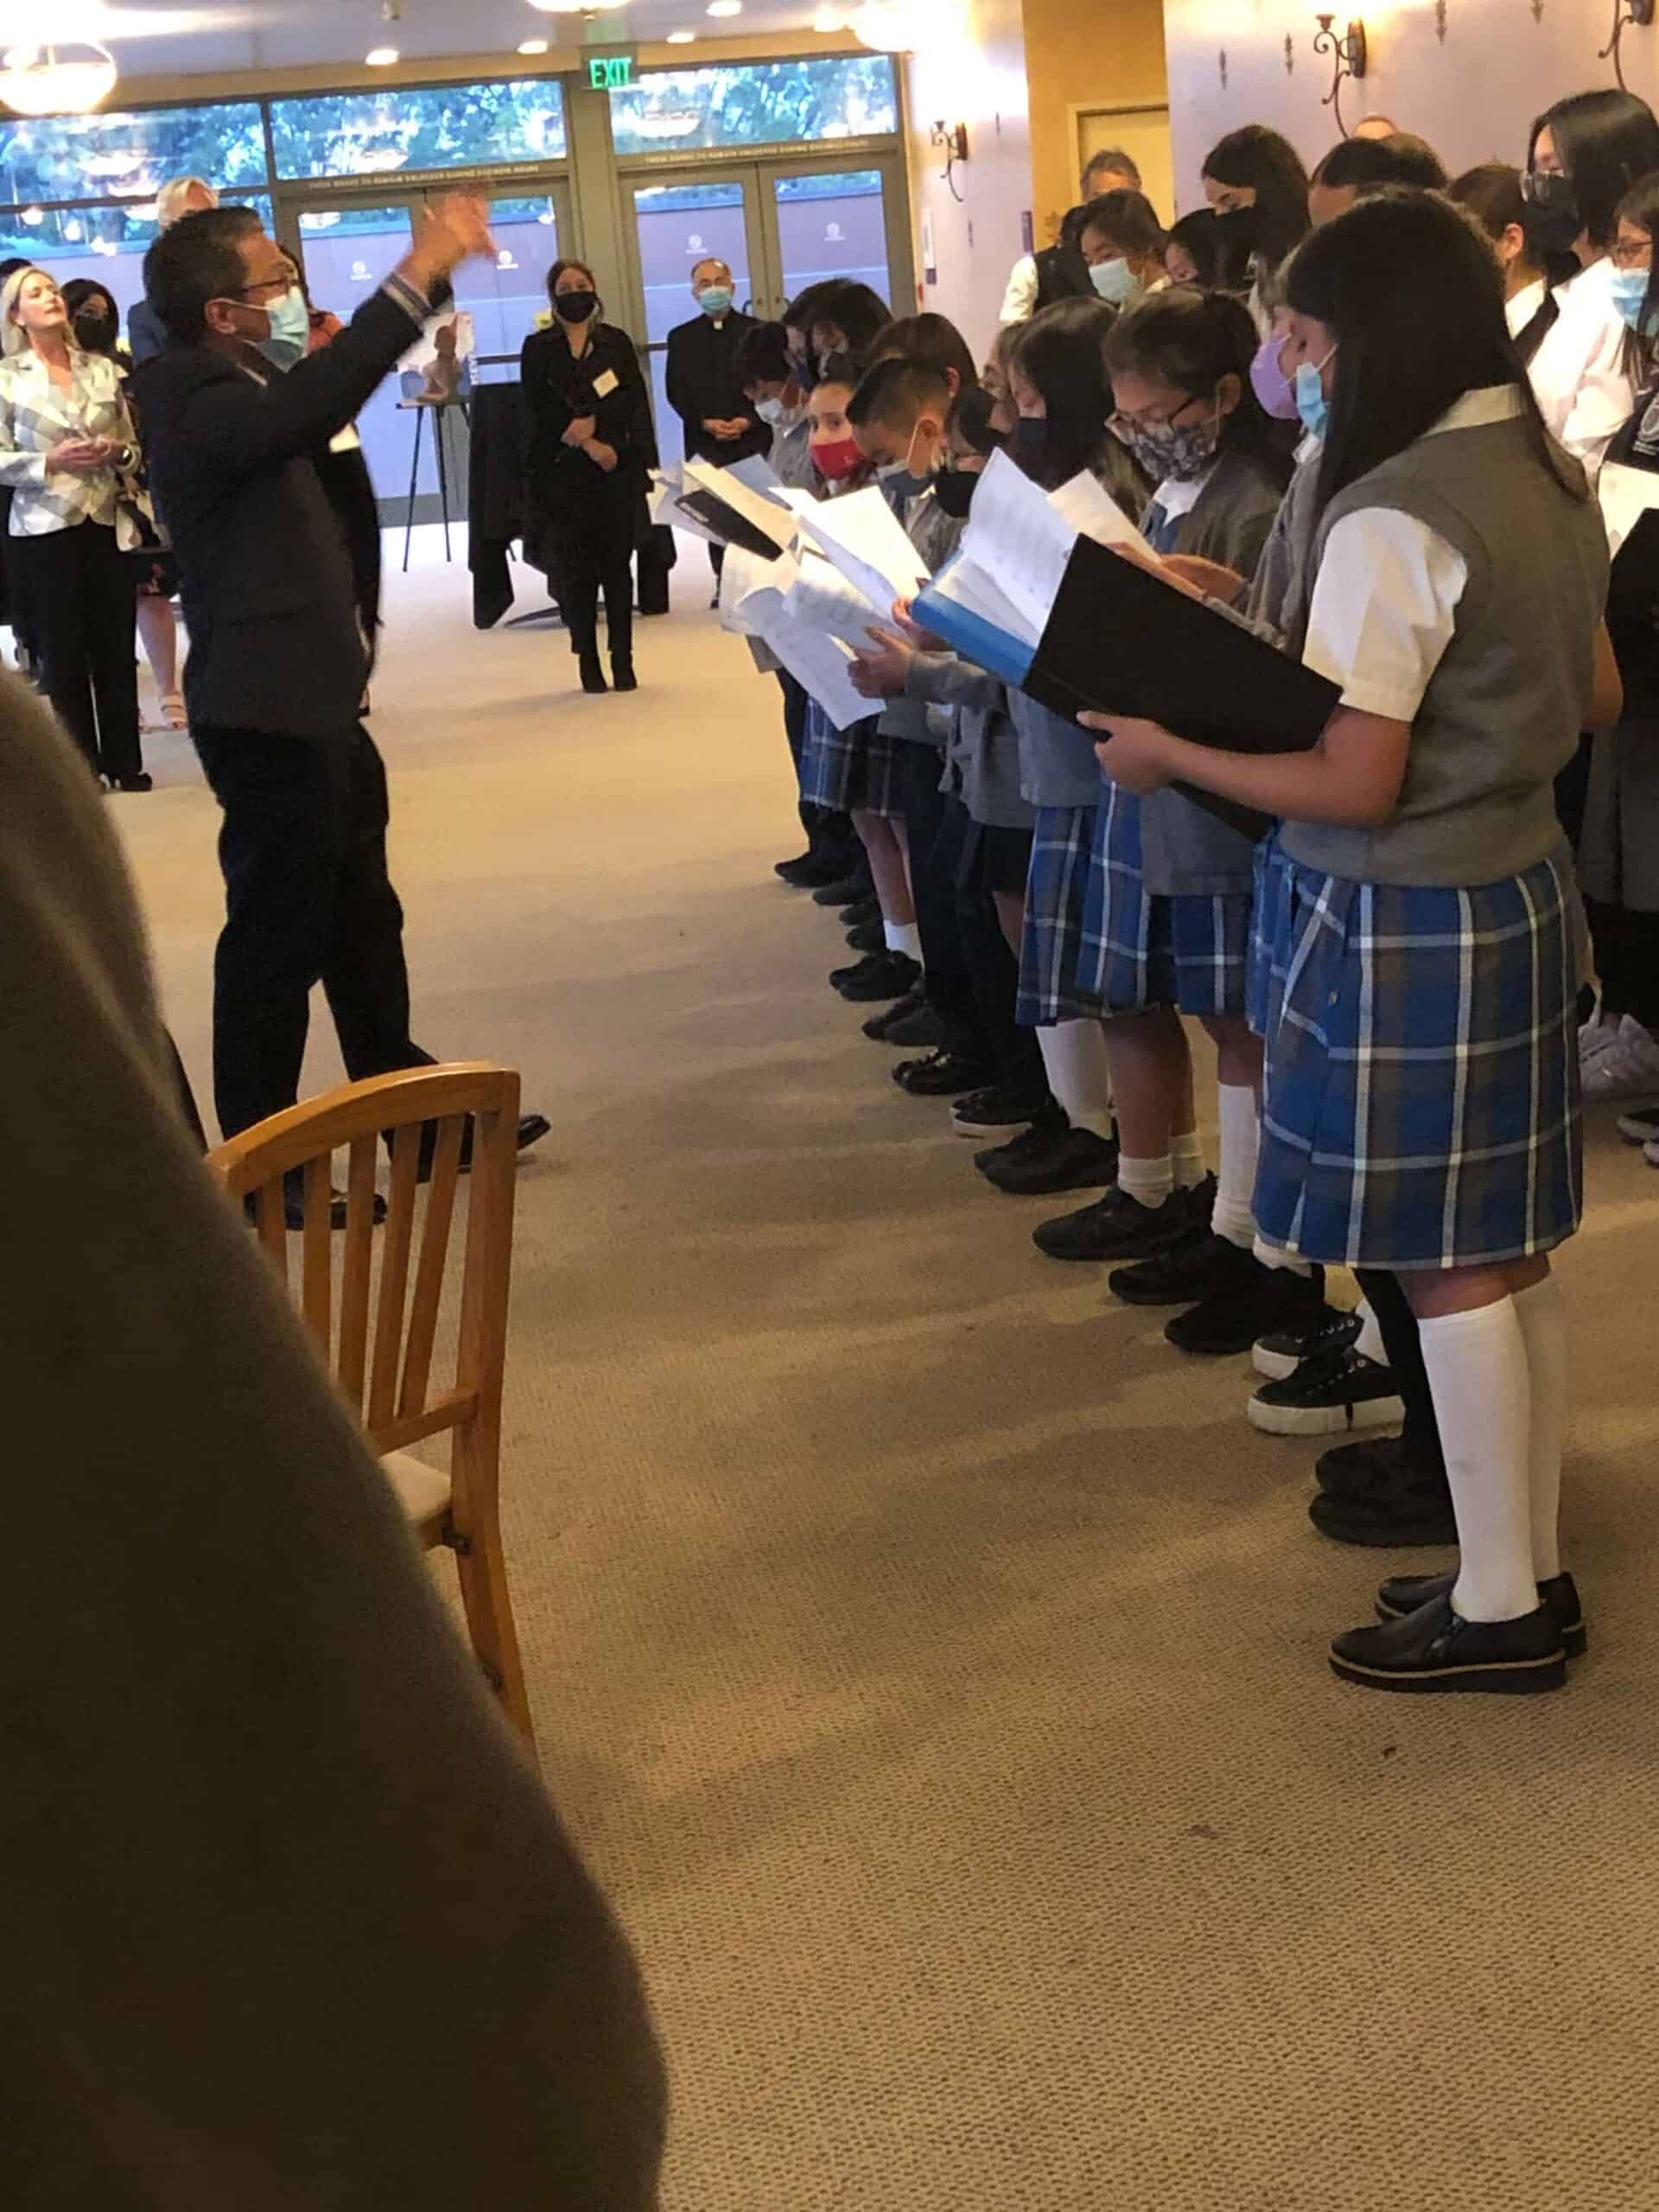 Catholic Education Foundation (CEF) Donor Appreciation Mass, December 5, 2021, Cathedral of Our Lady of the Angels, St. Genevieve School children’s choir.